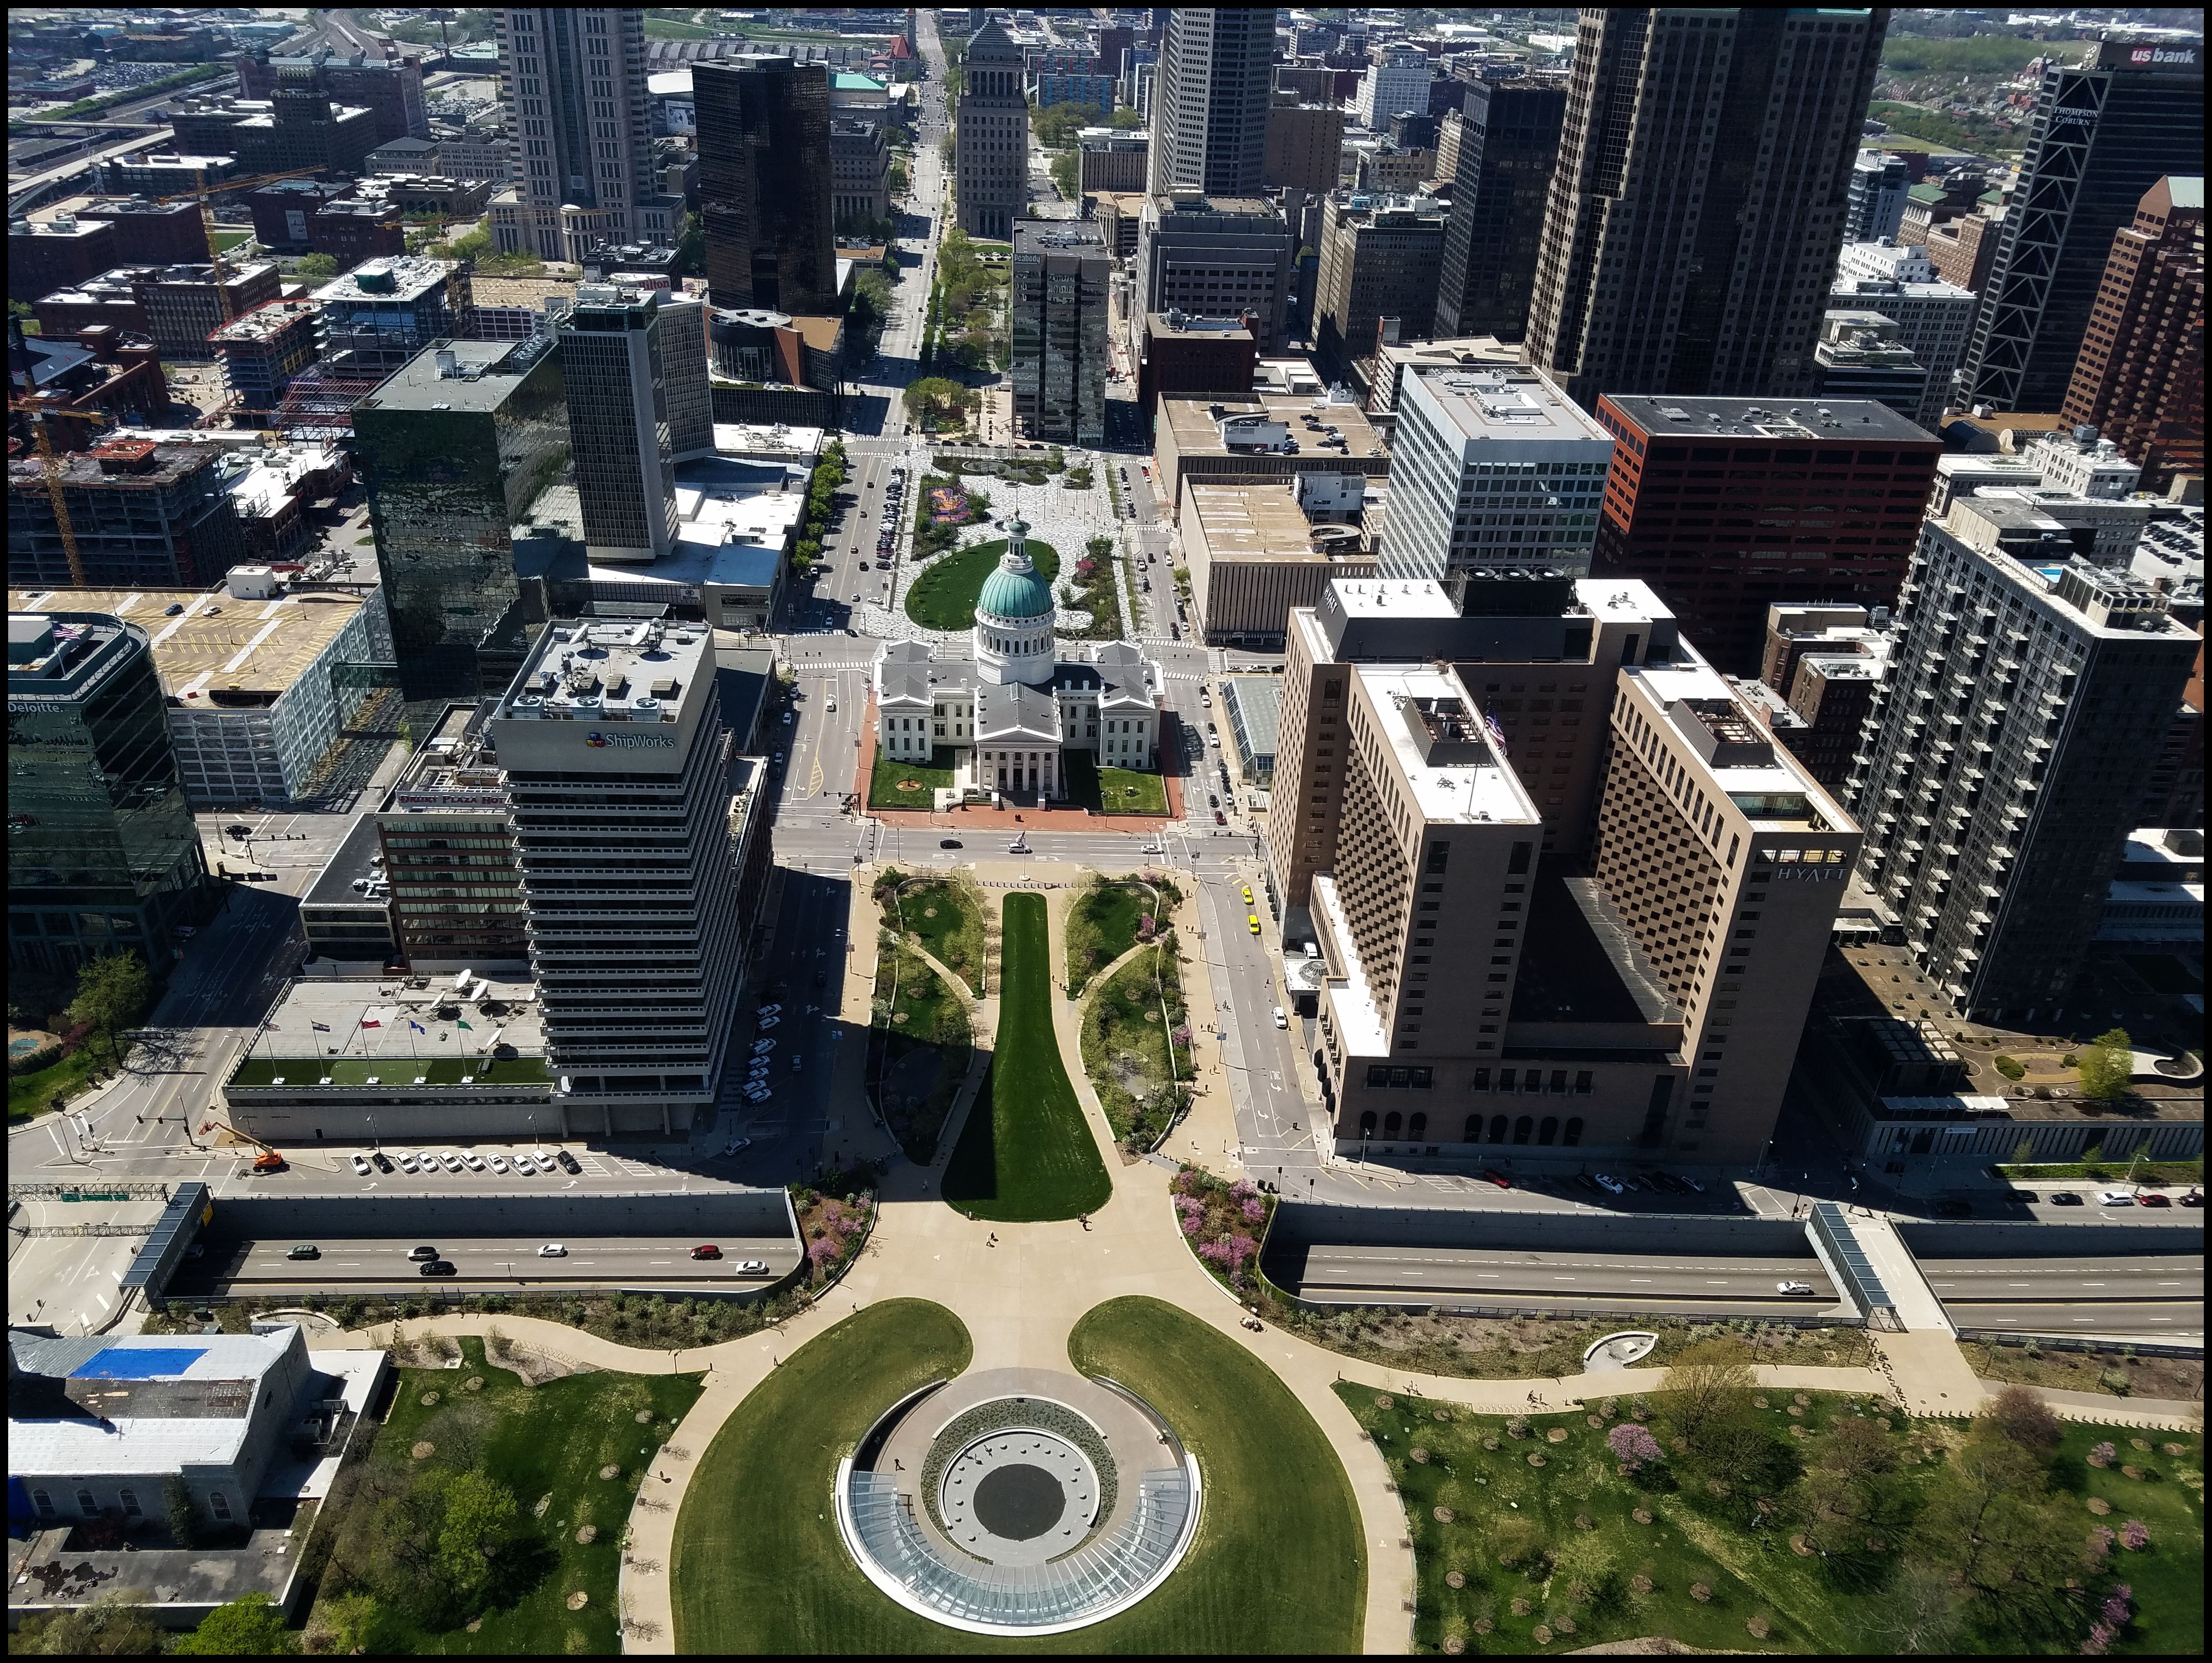 Gateway Arch National Park: Green Spaces Await - Travel With Sara